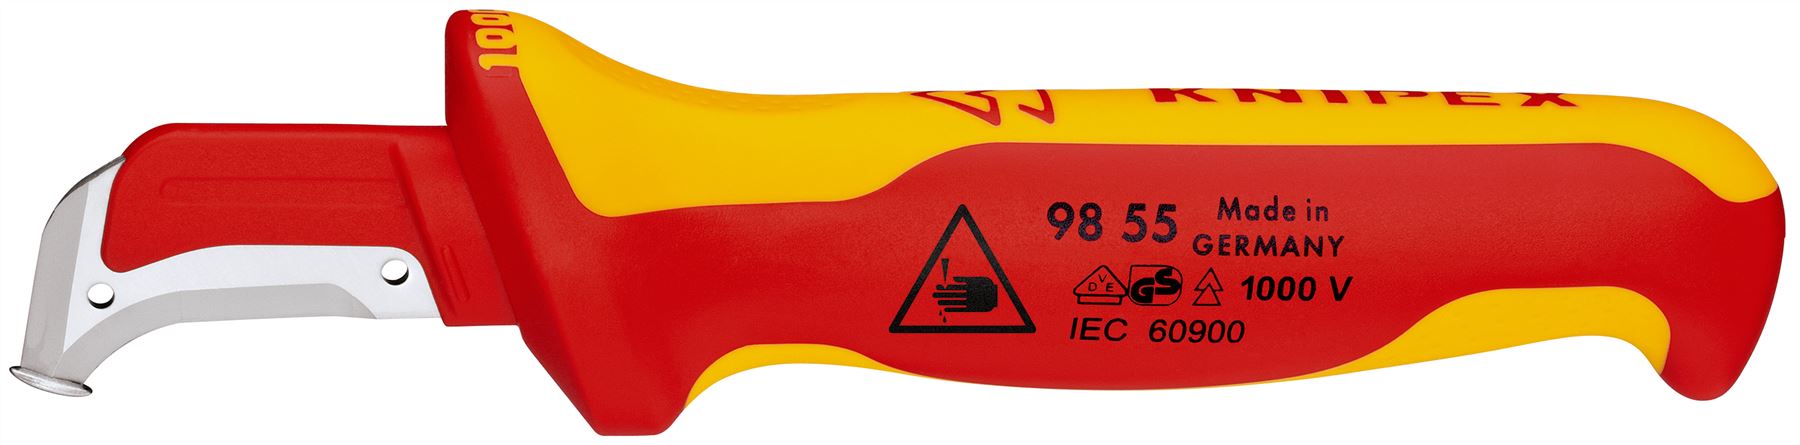 Knipex Stripping Knife with Guide Shoe VDE Insulated 1000V 38mm Blade Length 180mm 98 55 SB